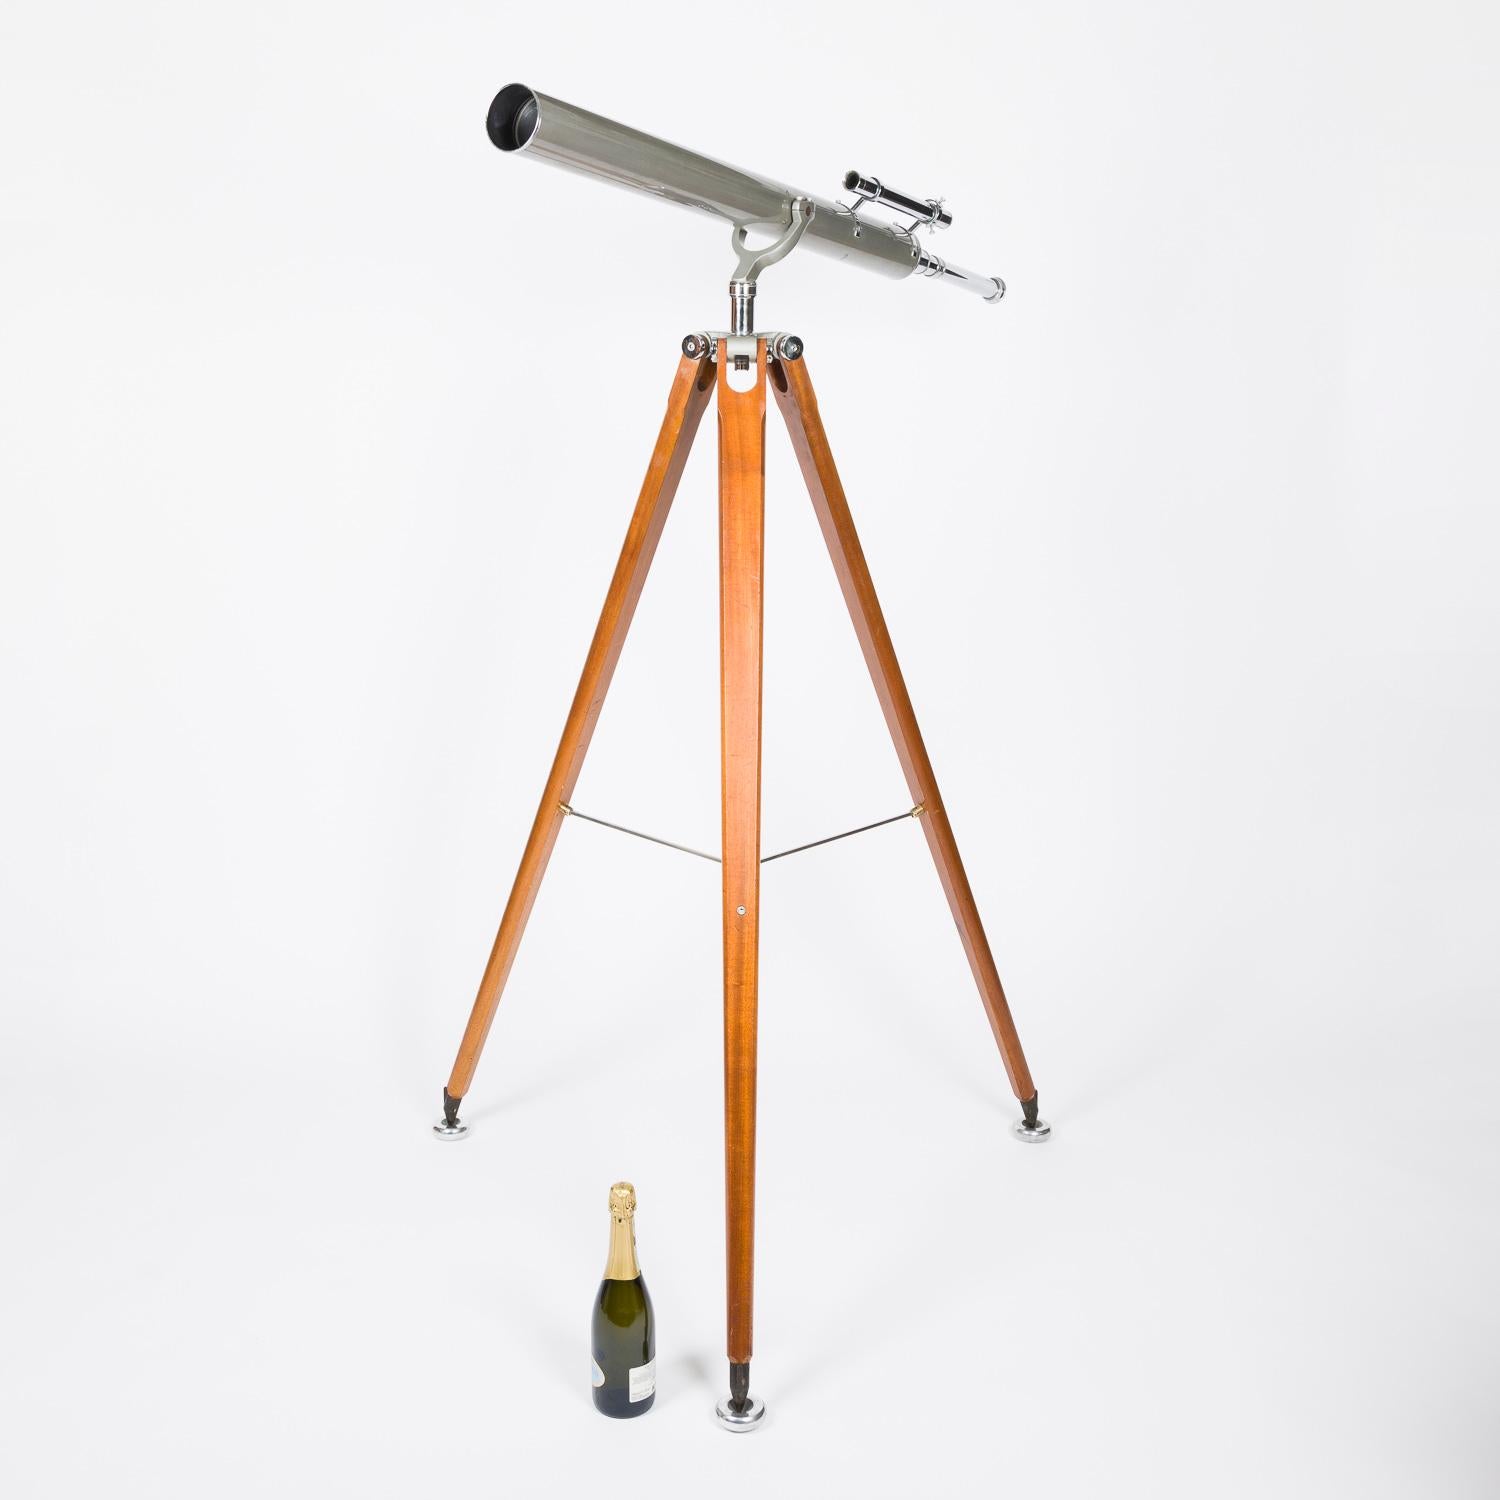 Astro tripod mounted telescope by Dollond of London 9